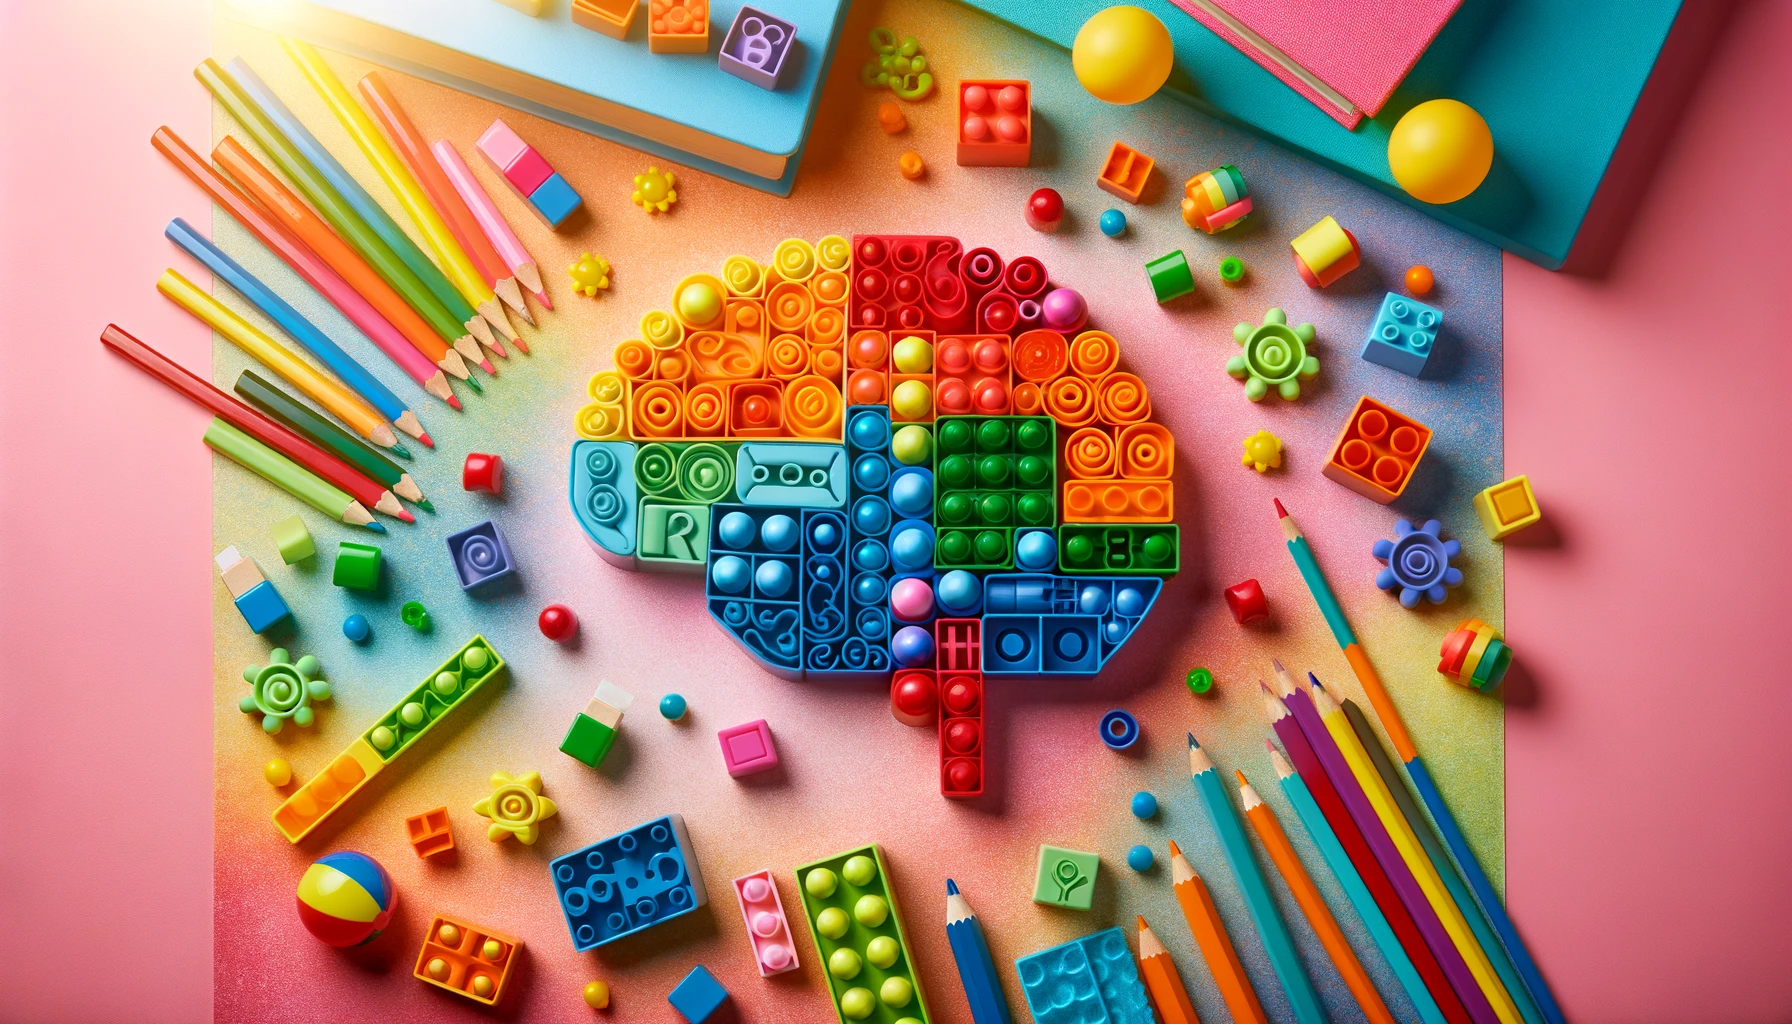 Creative brain-shaped structure made from colorful toy blocks on a vibrant background.